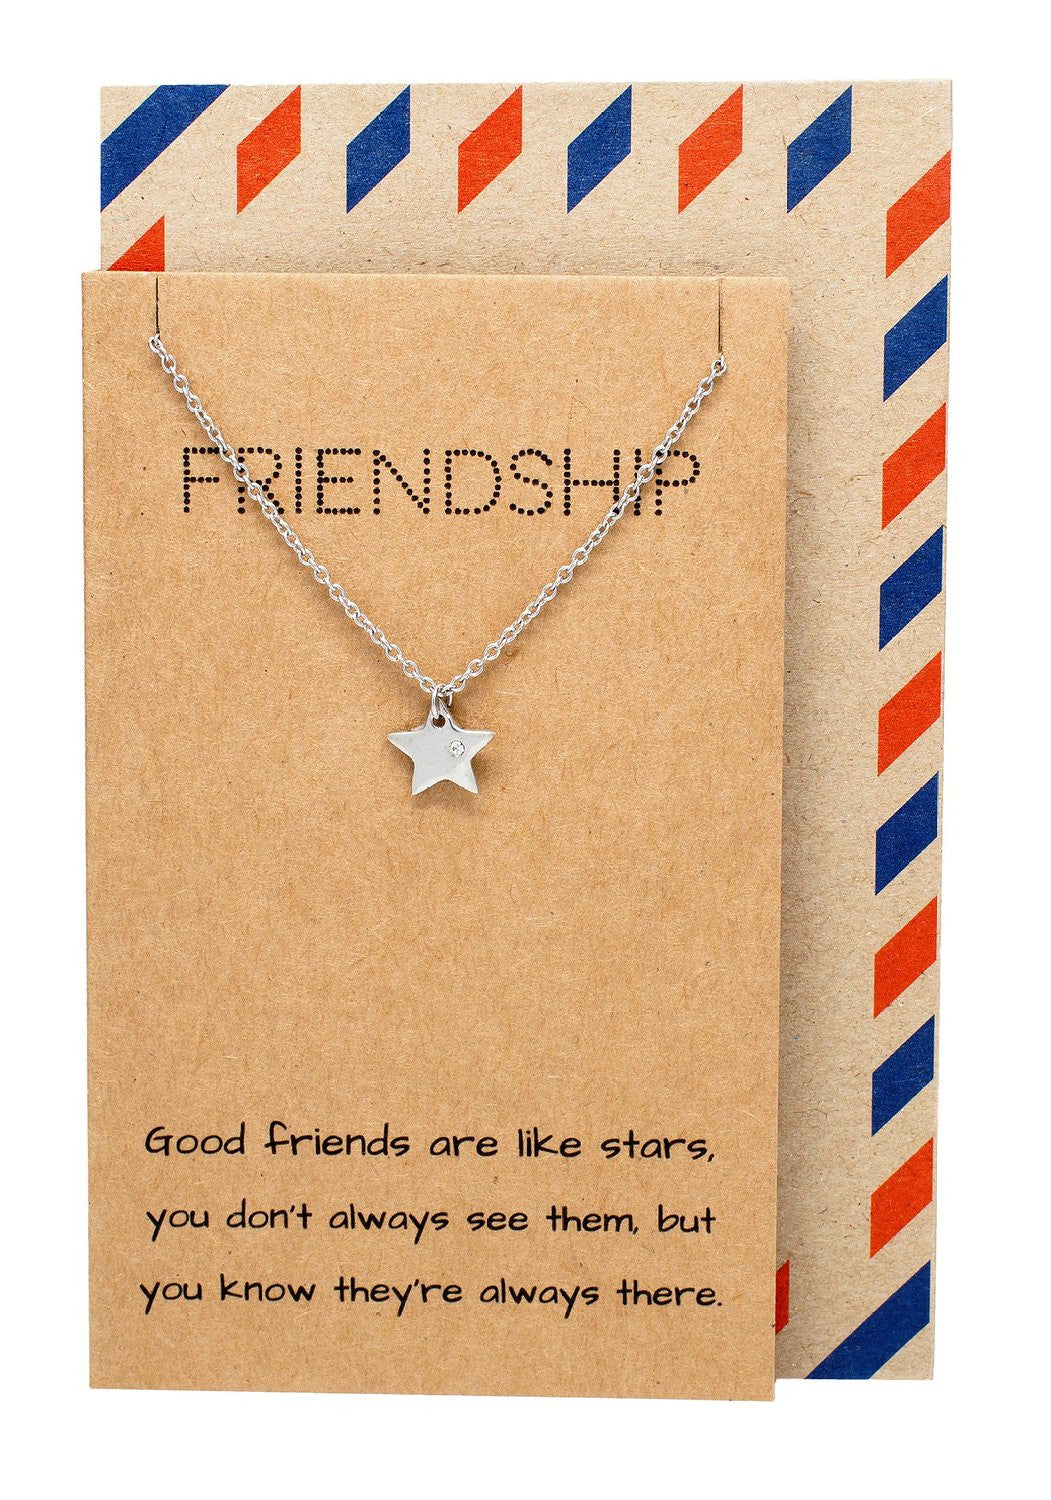 Ria Best Friend Necklaces with Star Pendant and Friendship Quotes Greeting Card